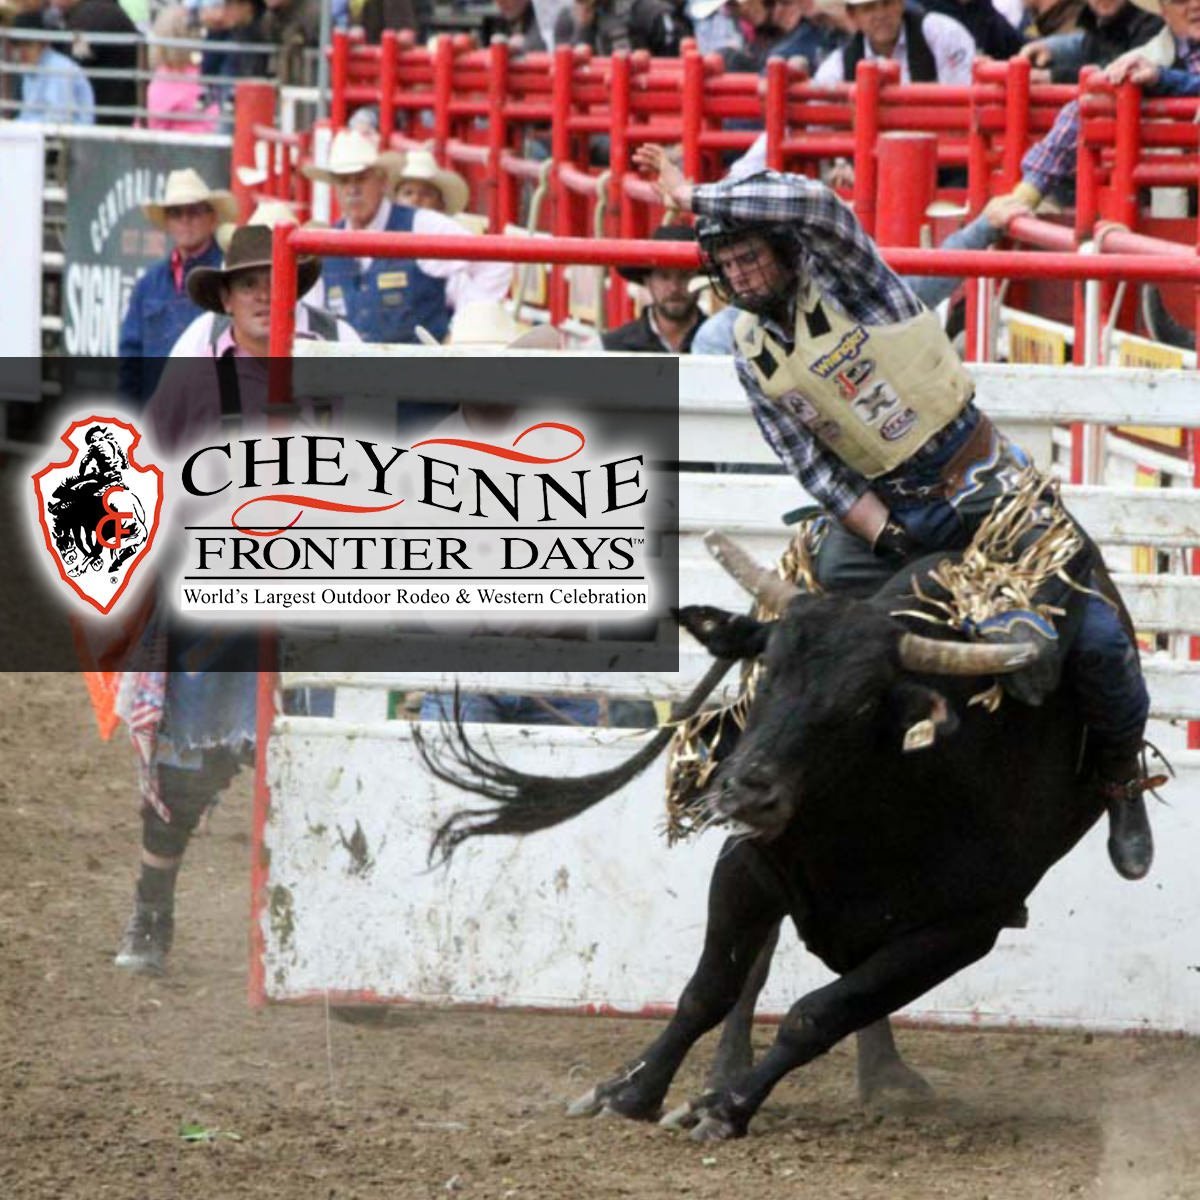 Cheyenne Frontier Days Rodeo Starts Friday July 21 & Ends Sunday July 30, 2017! The PRCA has awarded the Cheyenne Frontier Days Rodeo as the best Large Outdoor Rodeo Of The Year event more than 15 times!